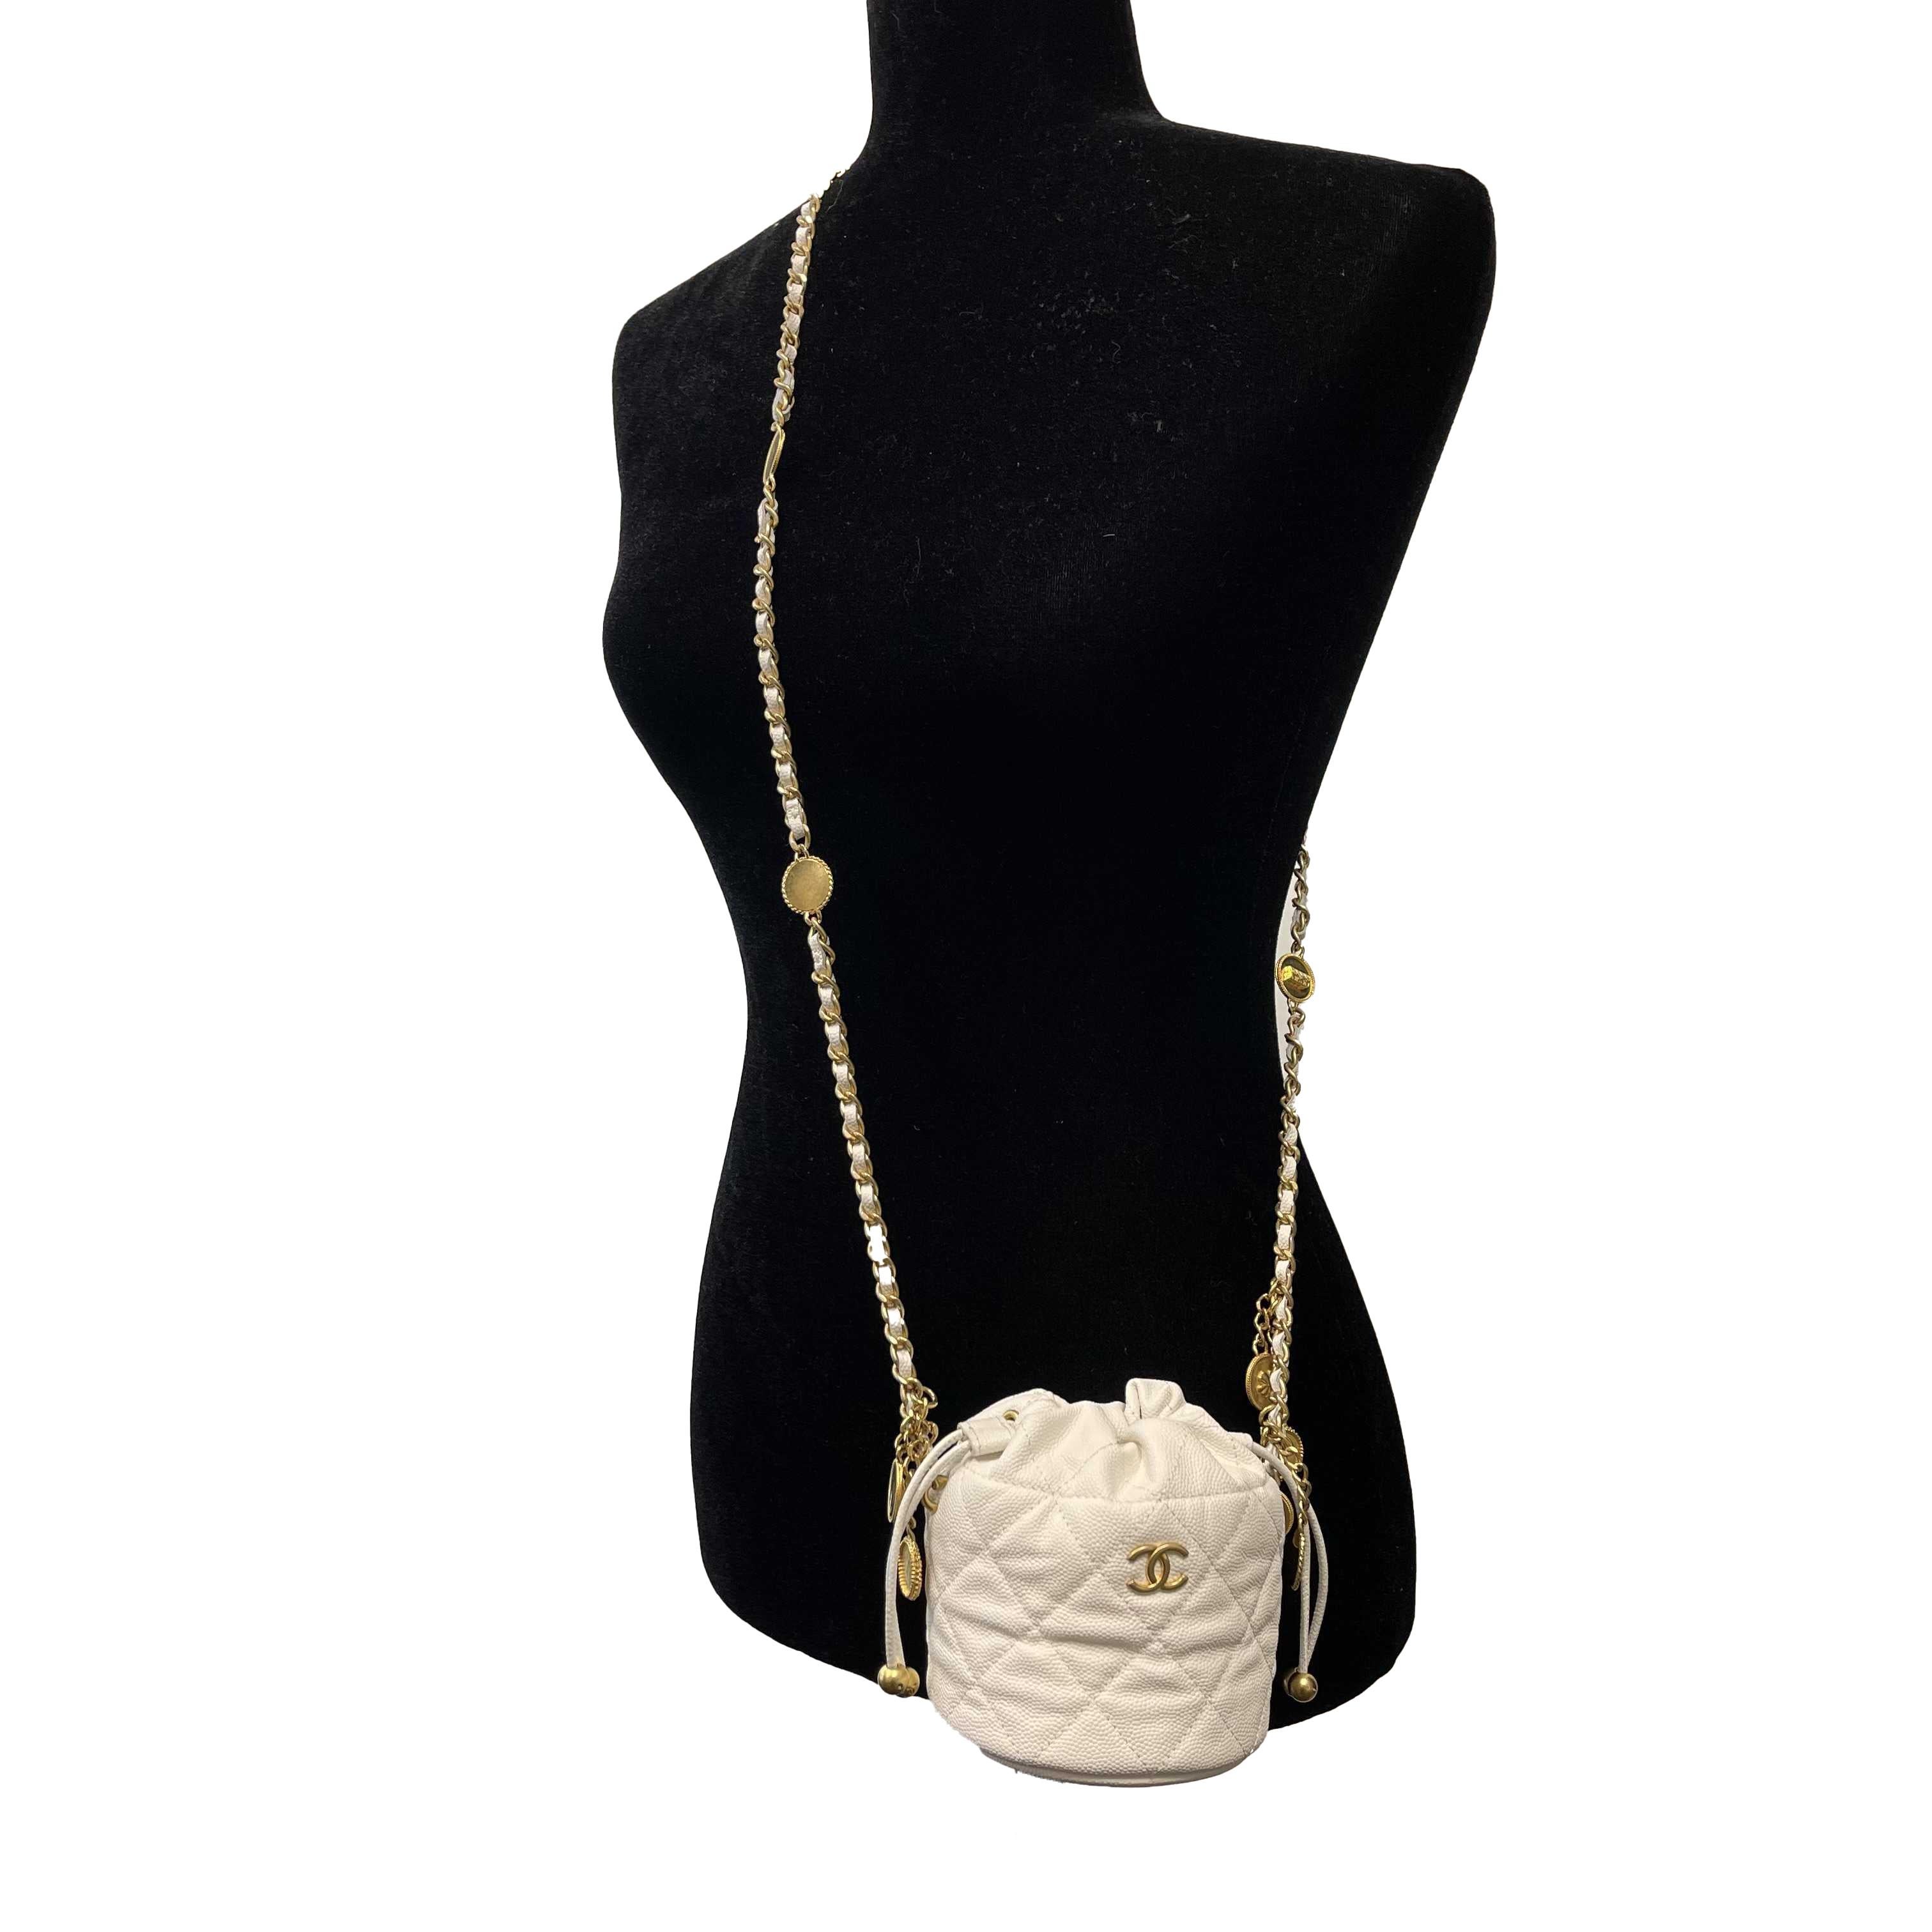 CHANEL - NEW Mini Bucket Bag - White Caviar Leather / Gold 10 Coins CC Crossbody For Sale 4